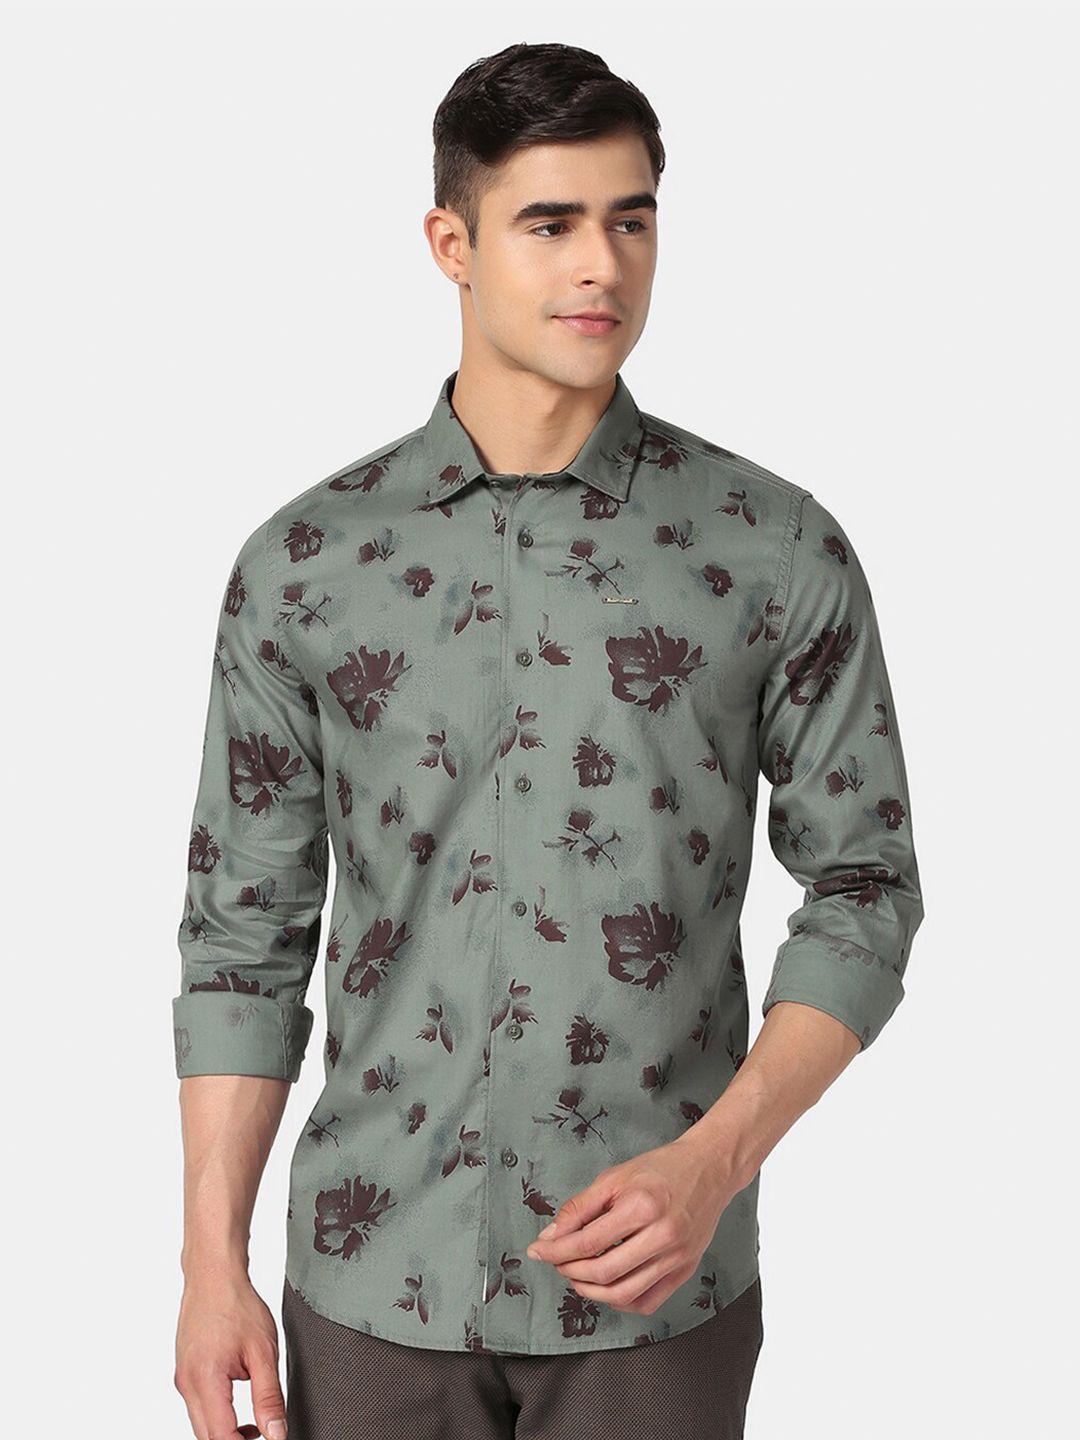 blackberrys india slim floral printed pure cotton casual shirt